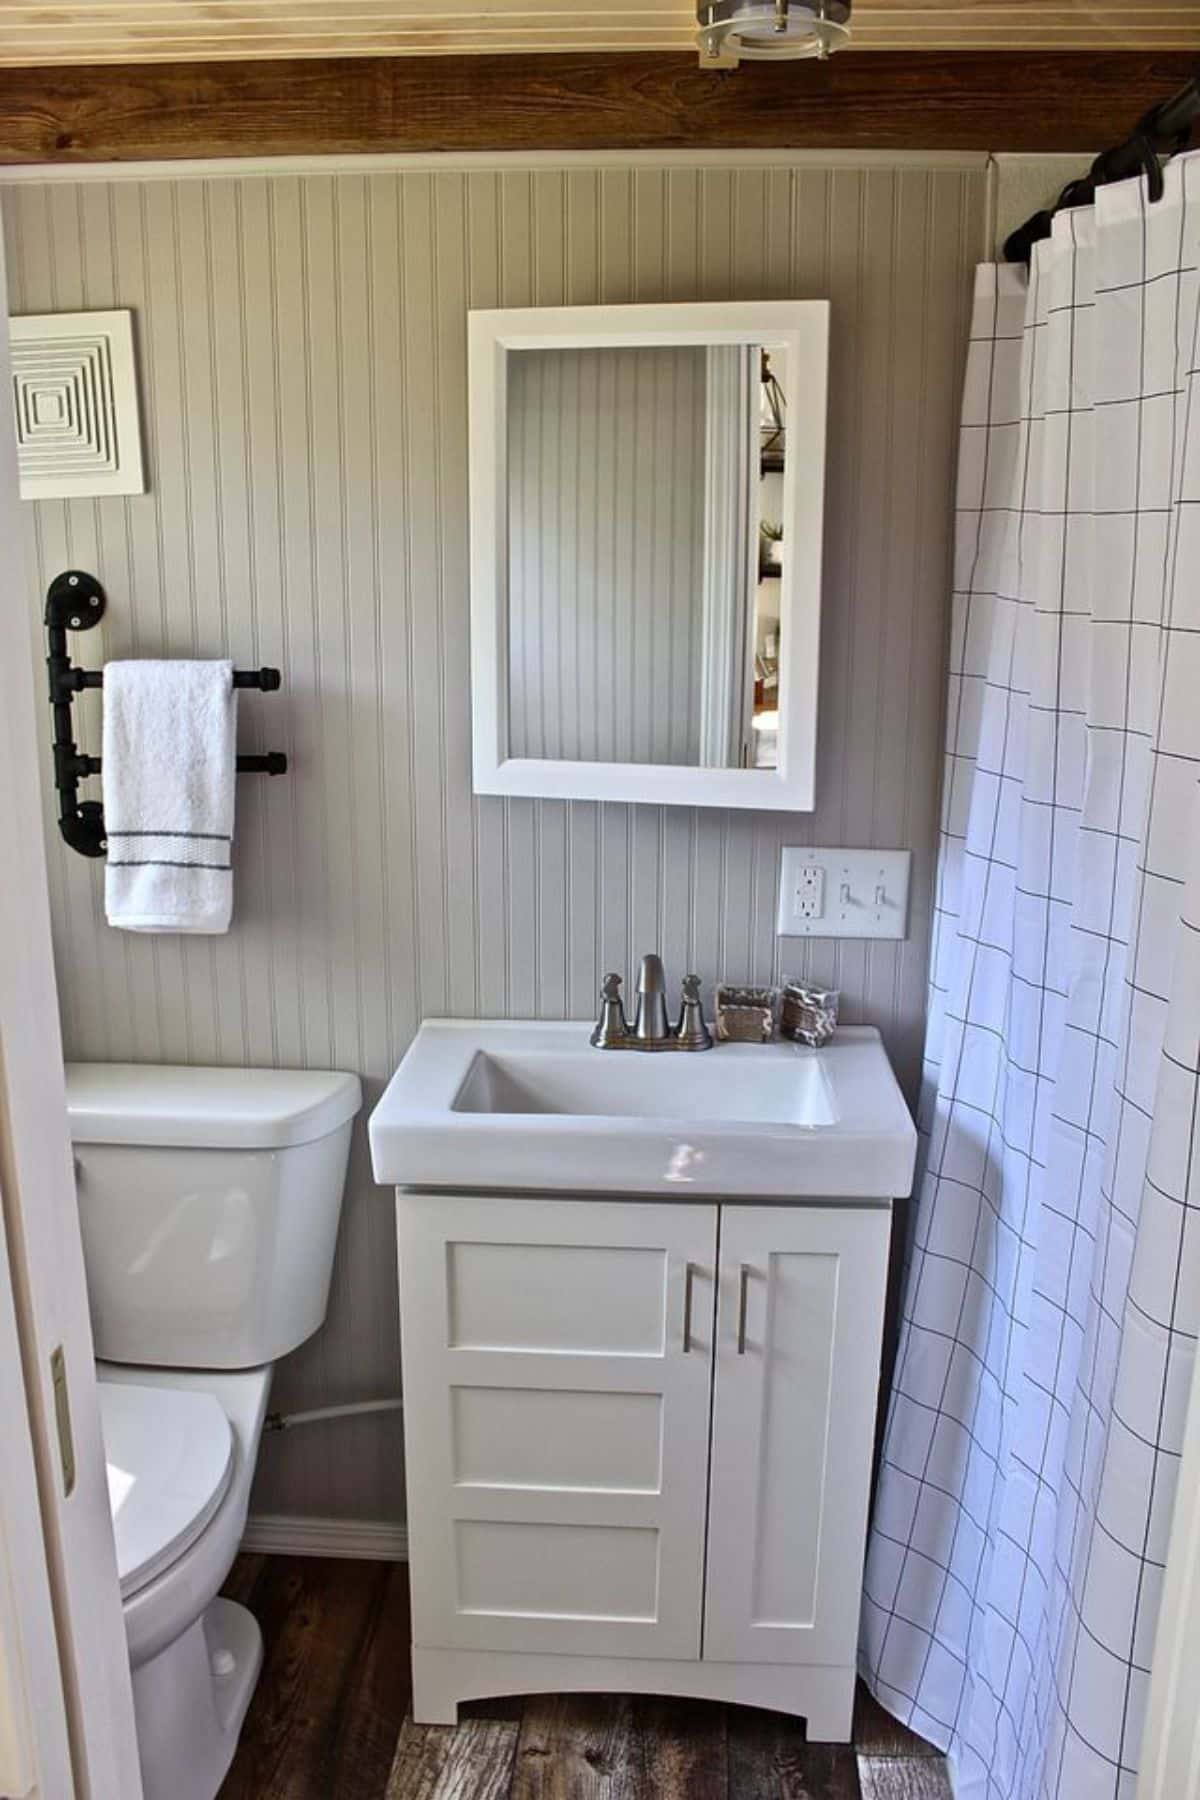 Standard fittings in bathroom of NOAH certified tiny home